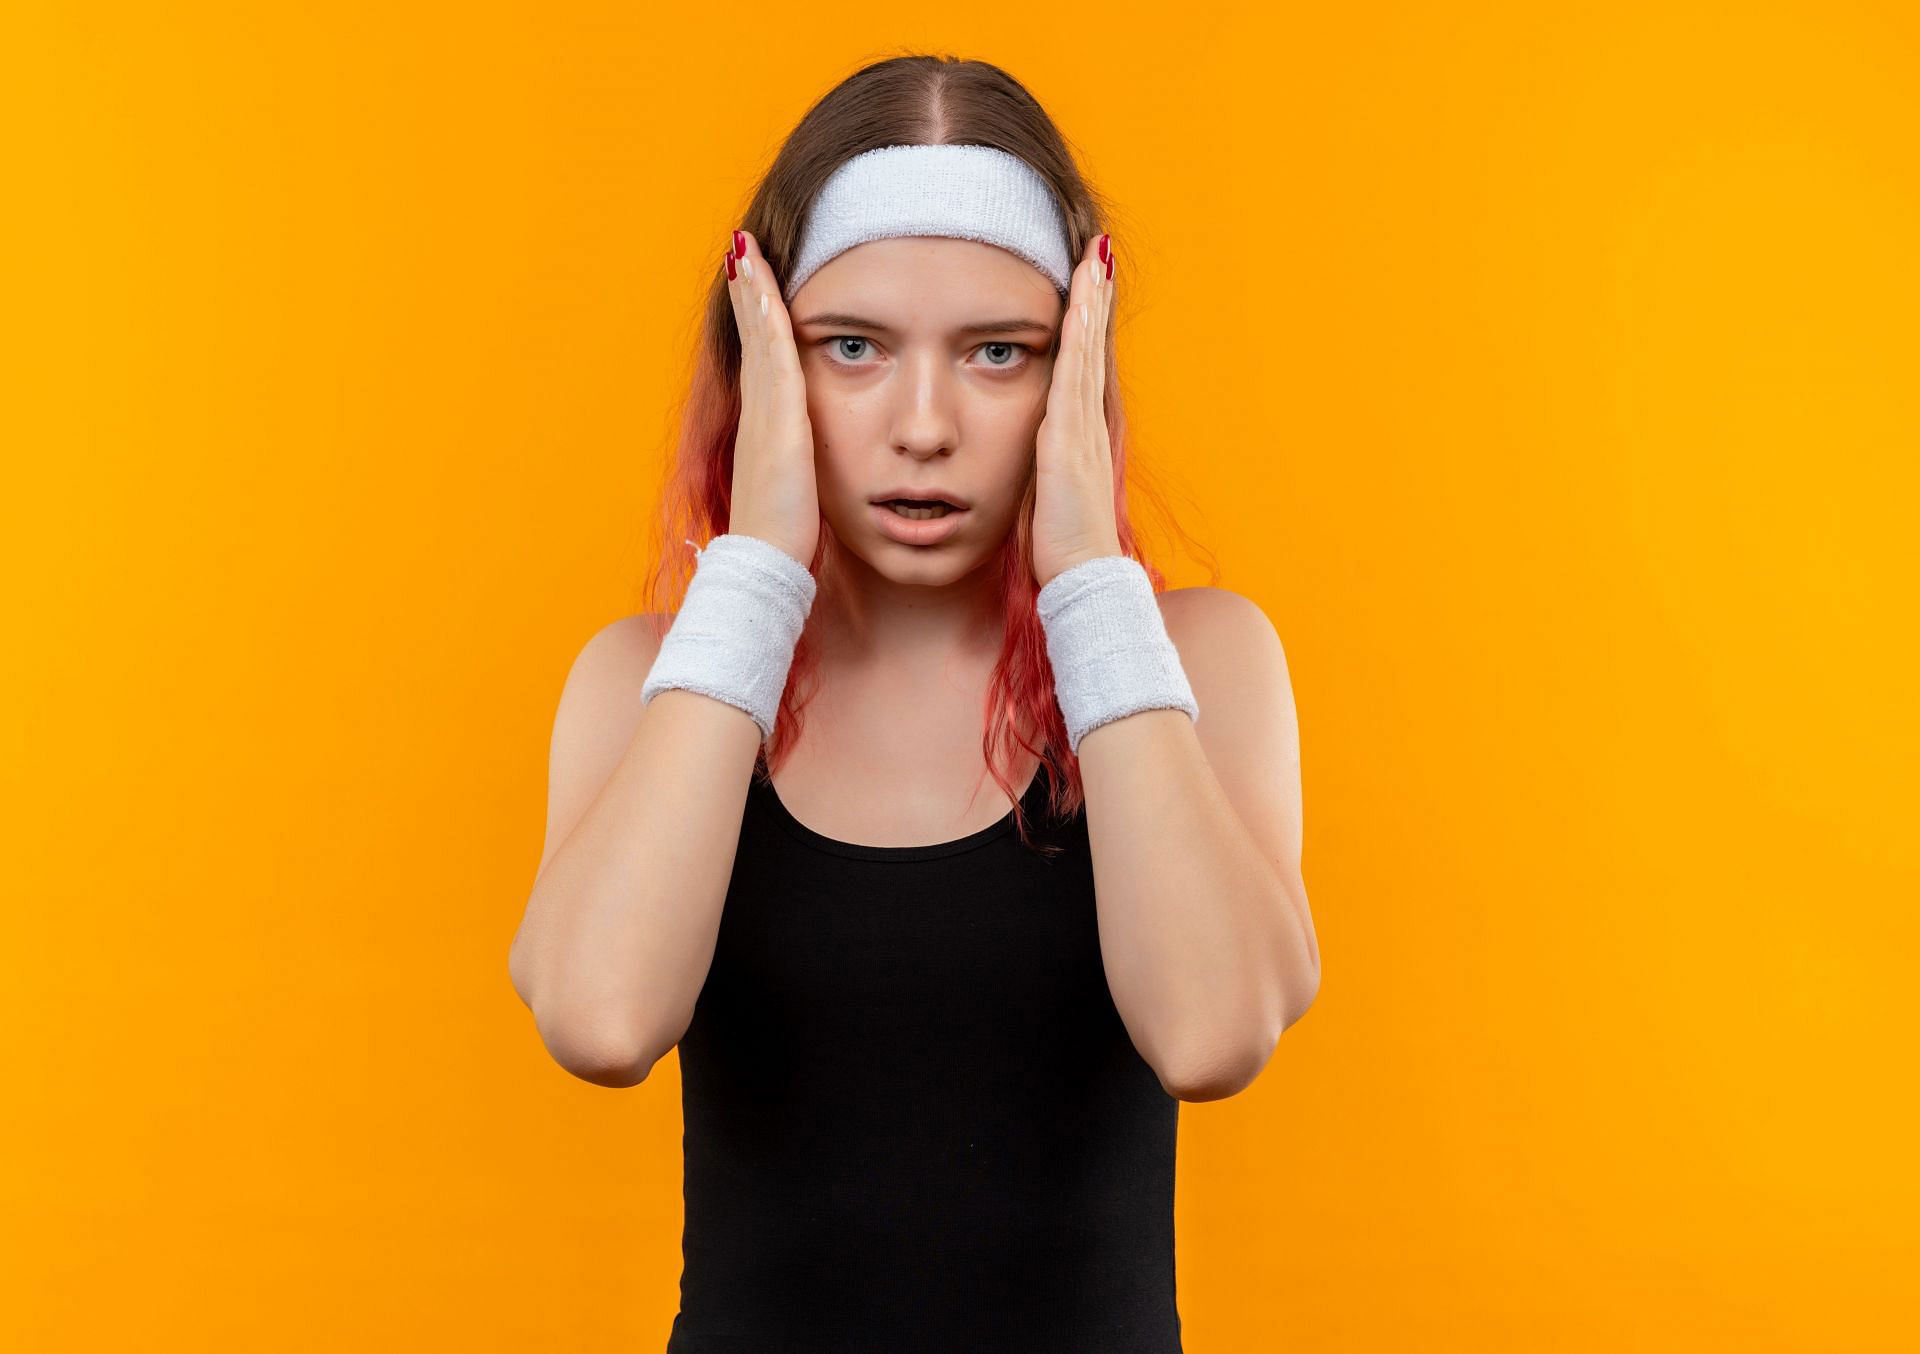 Gym Anxiety: Overcoming Fear in the Fitness Environment